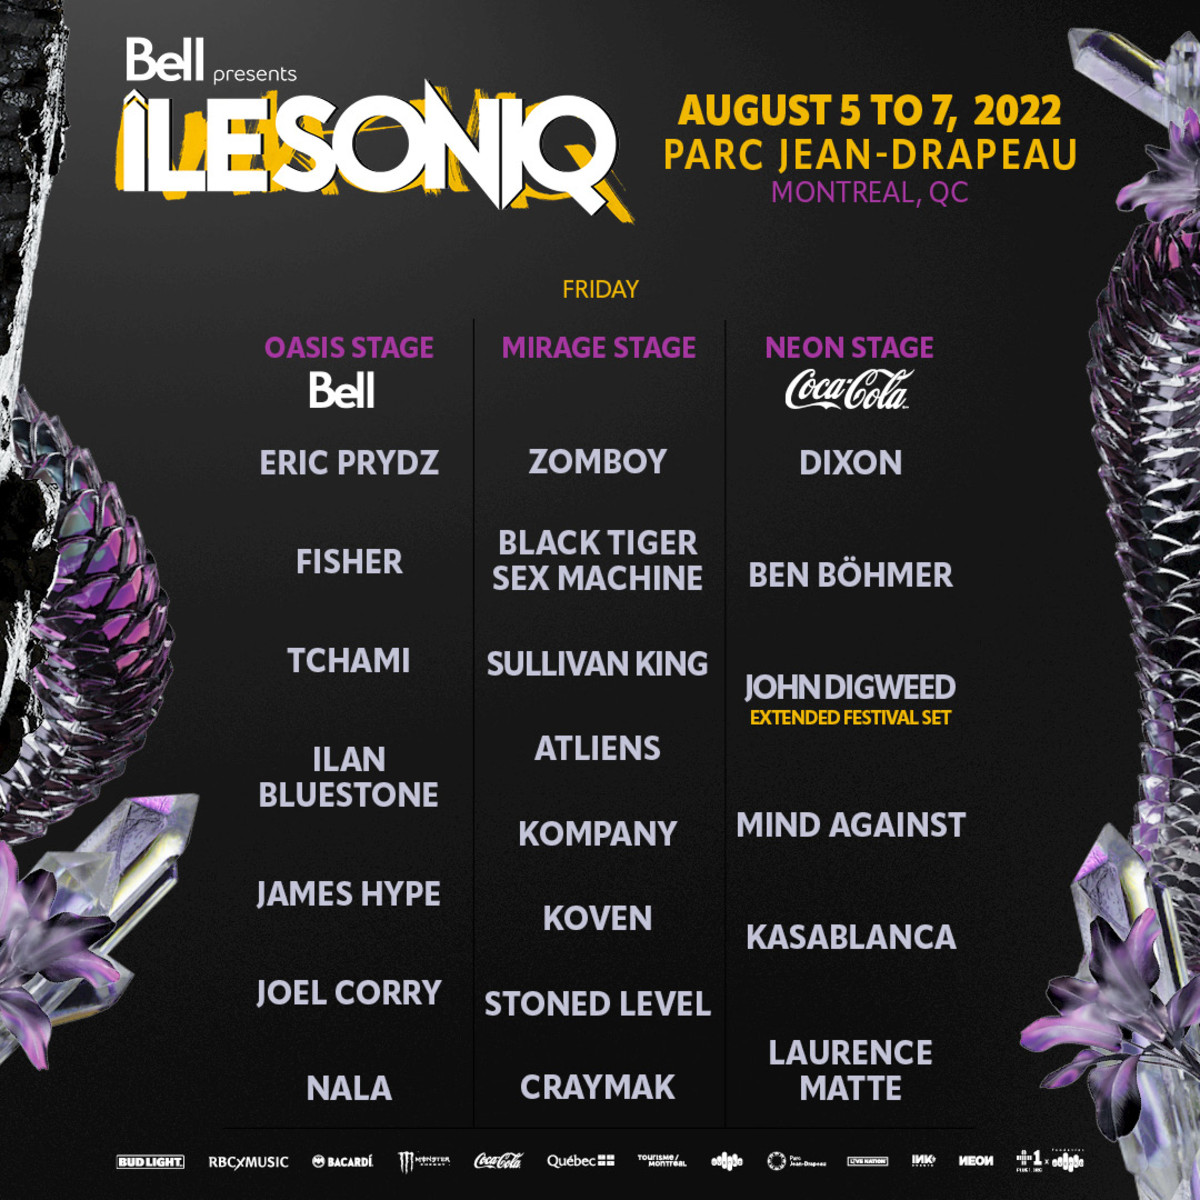 Lineup for August 5th, Day 1 of ÎLESONIQ 2022.